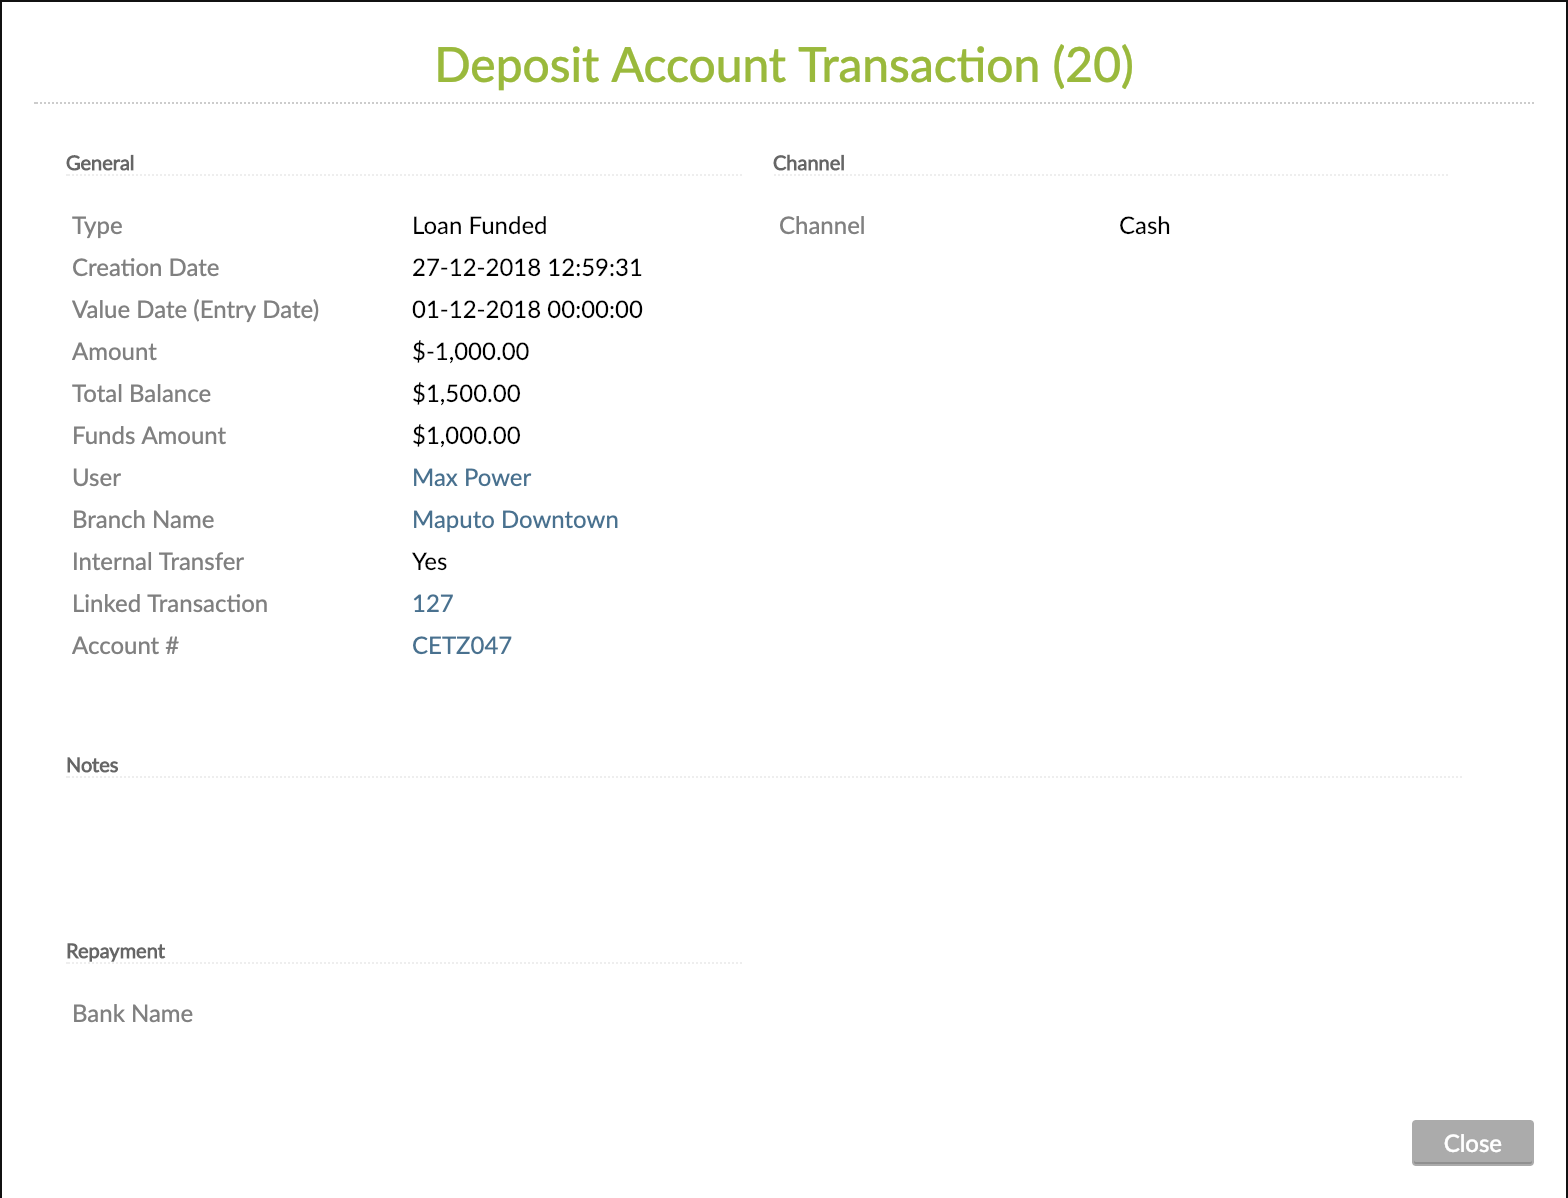 Deposit Account Transaction with General, Channel, Notes and Repayment sections.